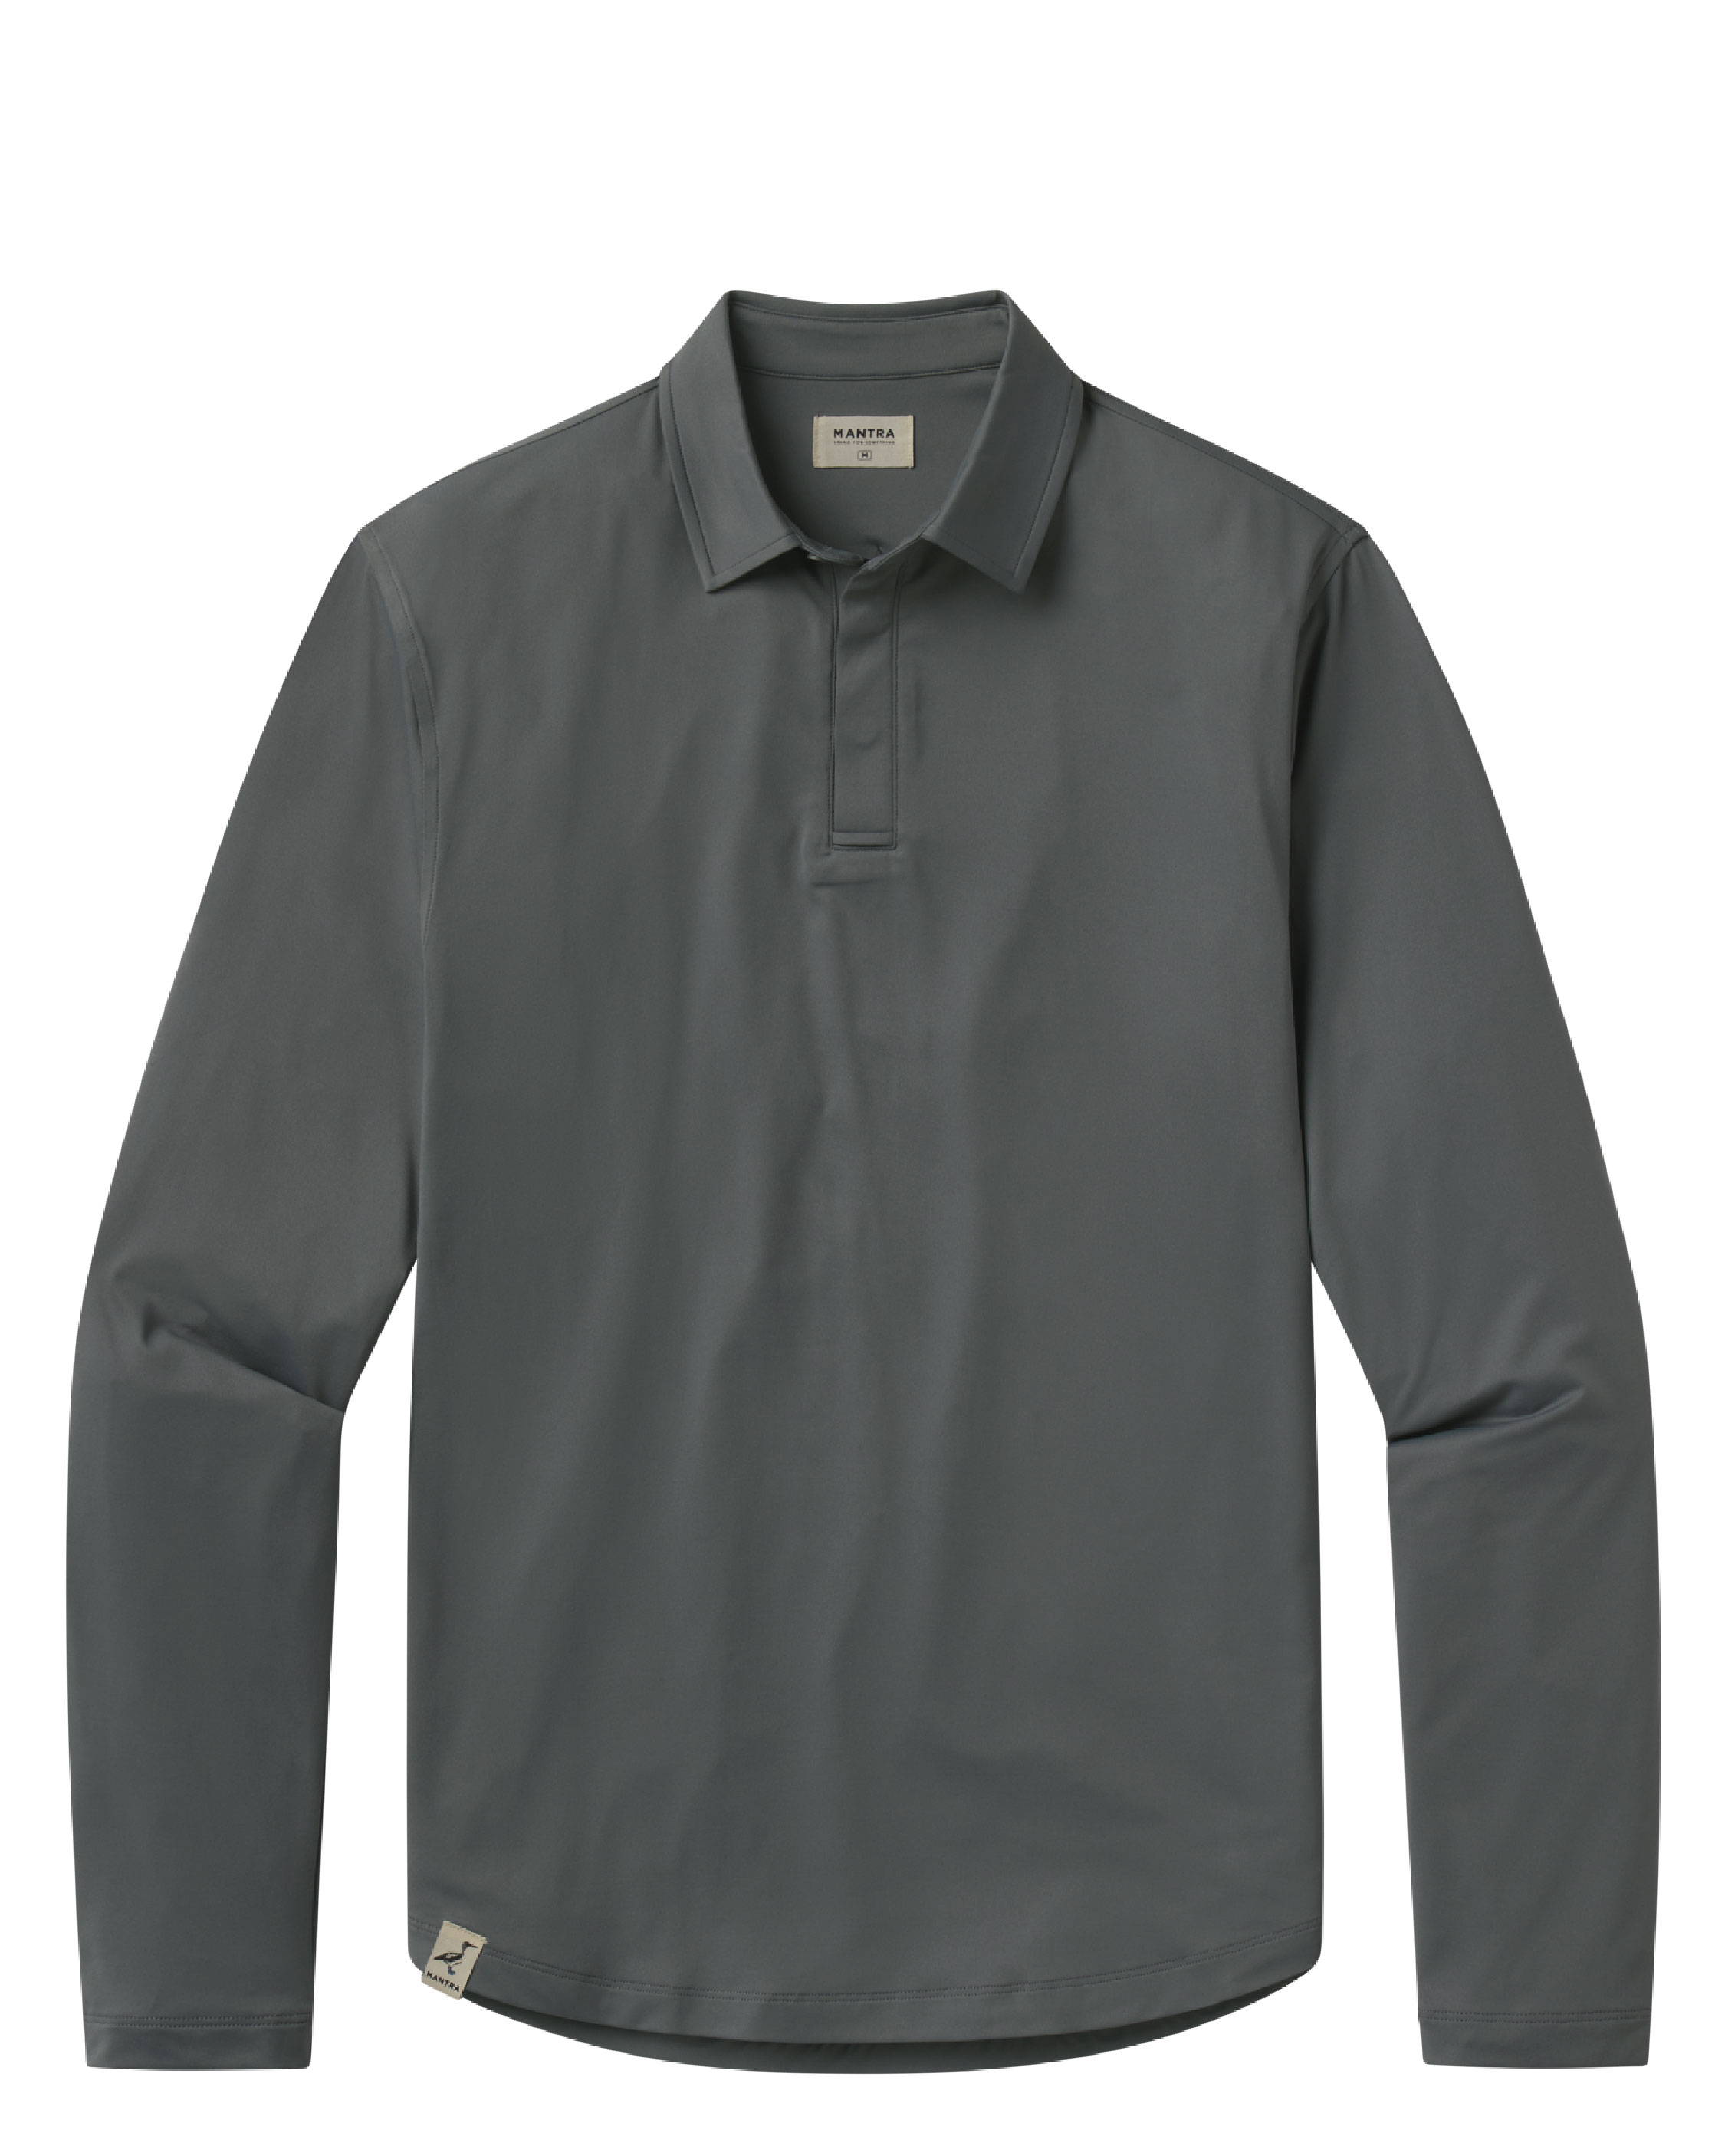 CATALYST POLO L/S - POINT COLLAR - VOLCANIC ASH color selector